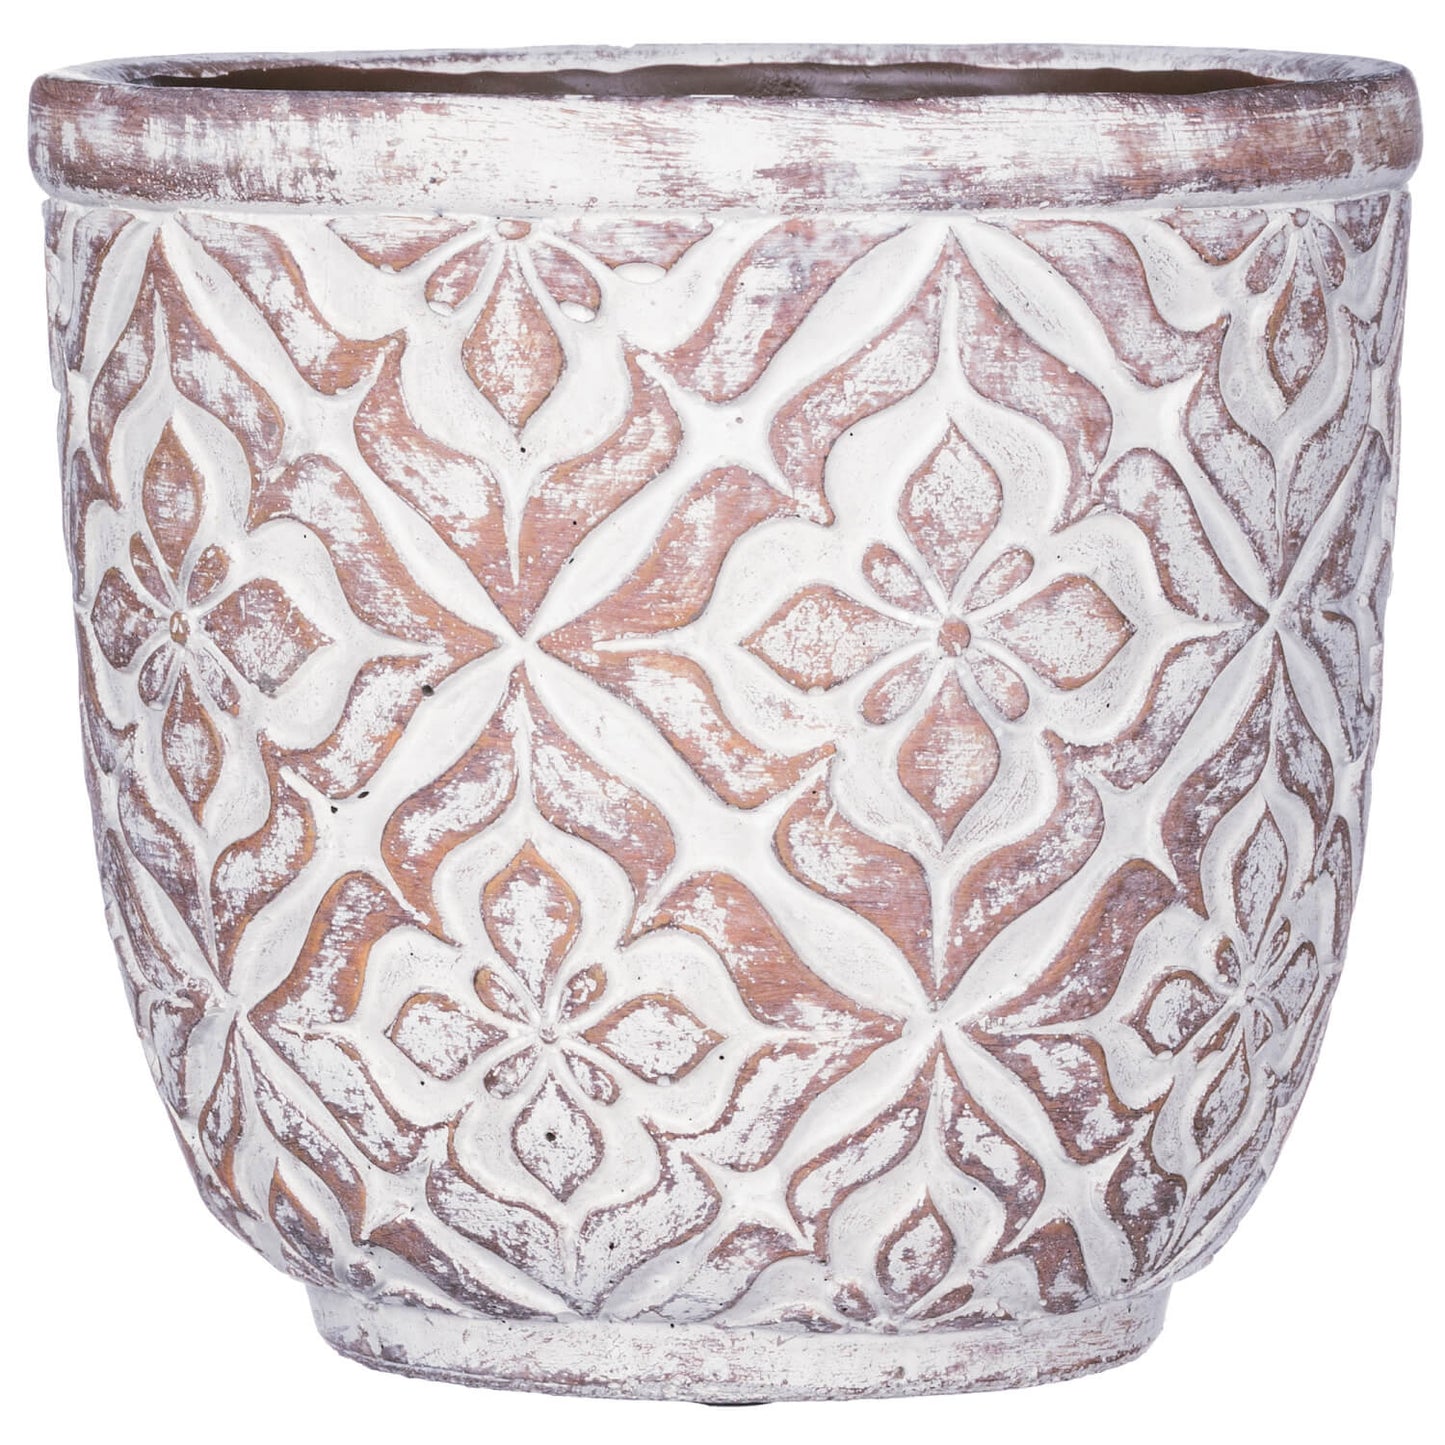 round pot with white-wash finish highlighting the geometric floral pattern.